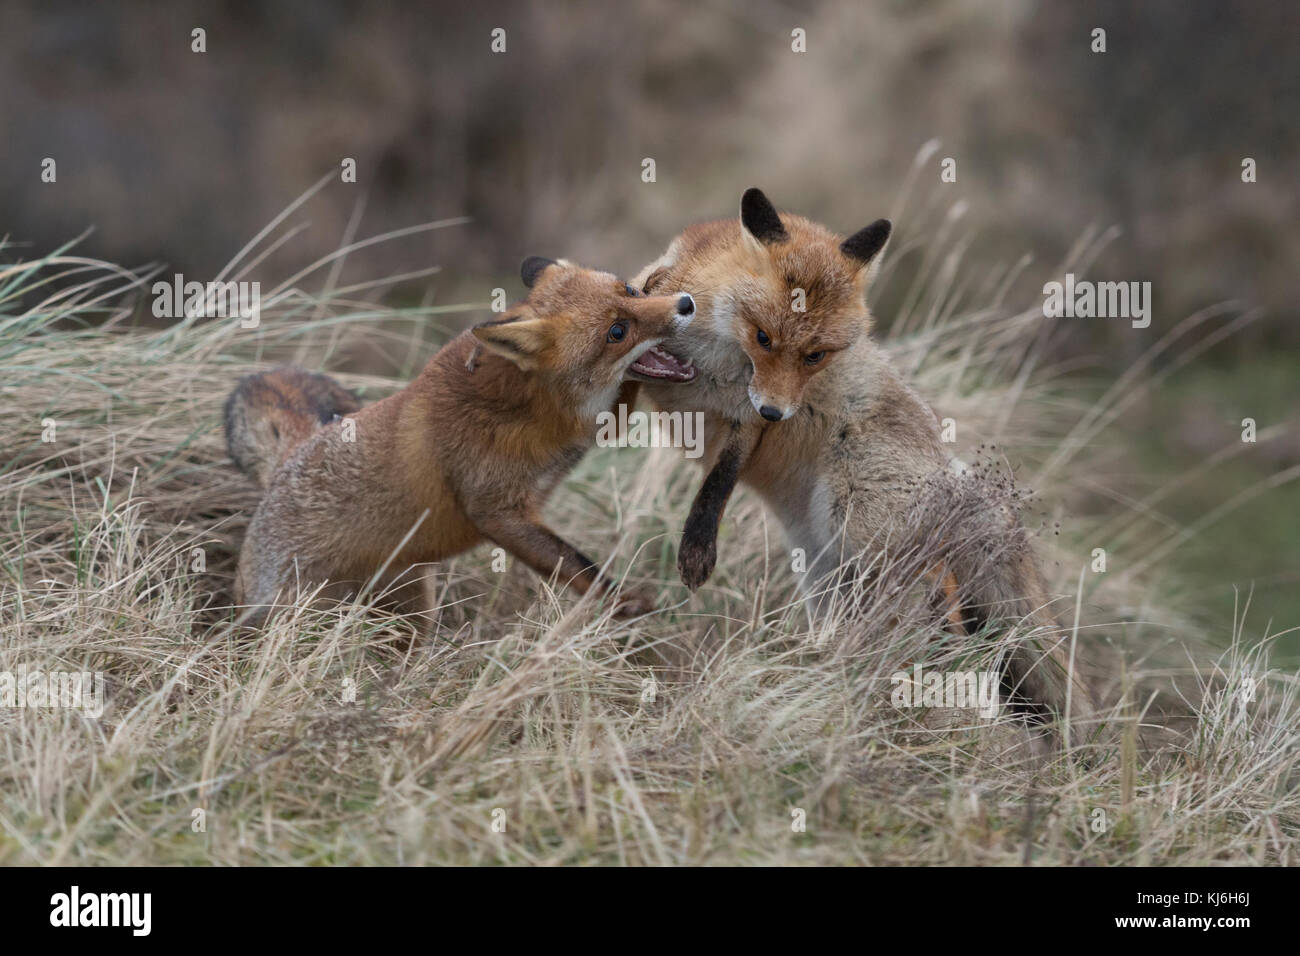 Red Foxes ( Vulpes vulpes ), two adults in agressive fight, fighting, biting each other, territorial behaviour, mating season, wildlife, Europe. Stock Photo